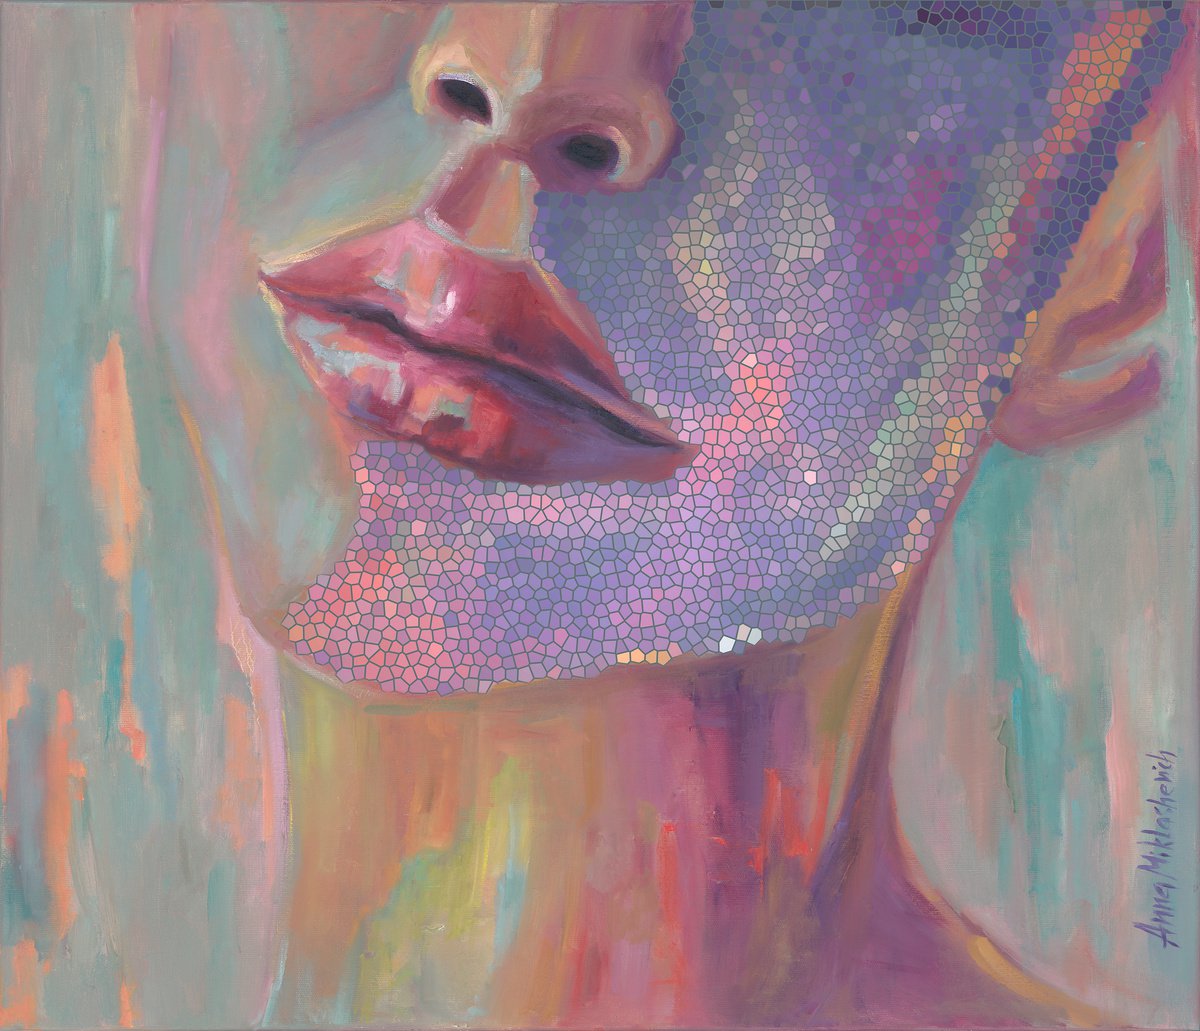 COSMIC WOMAN - Limited Edition of 10, Giclee prints on canvas by Anna Miklashevich